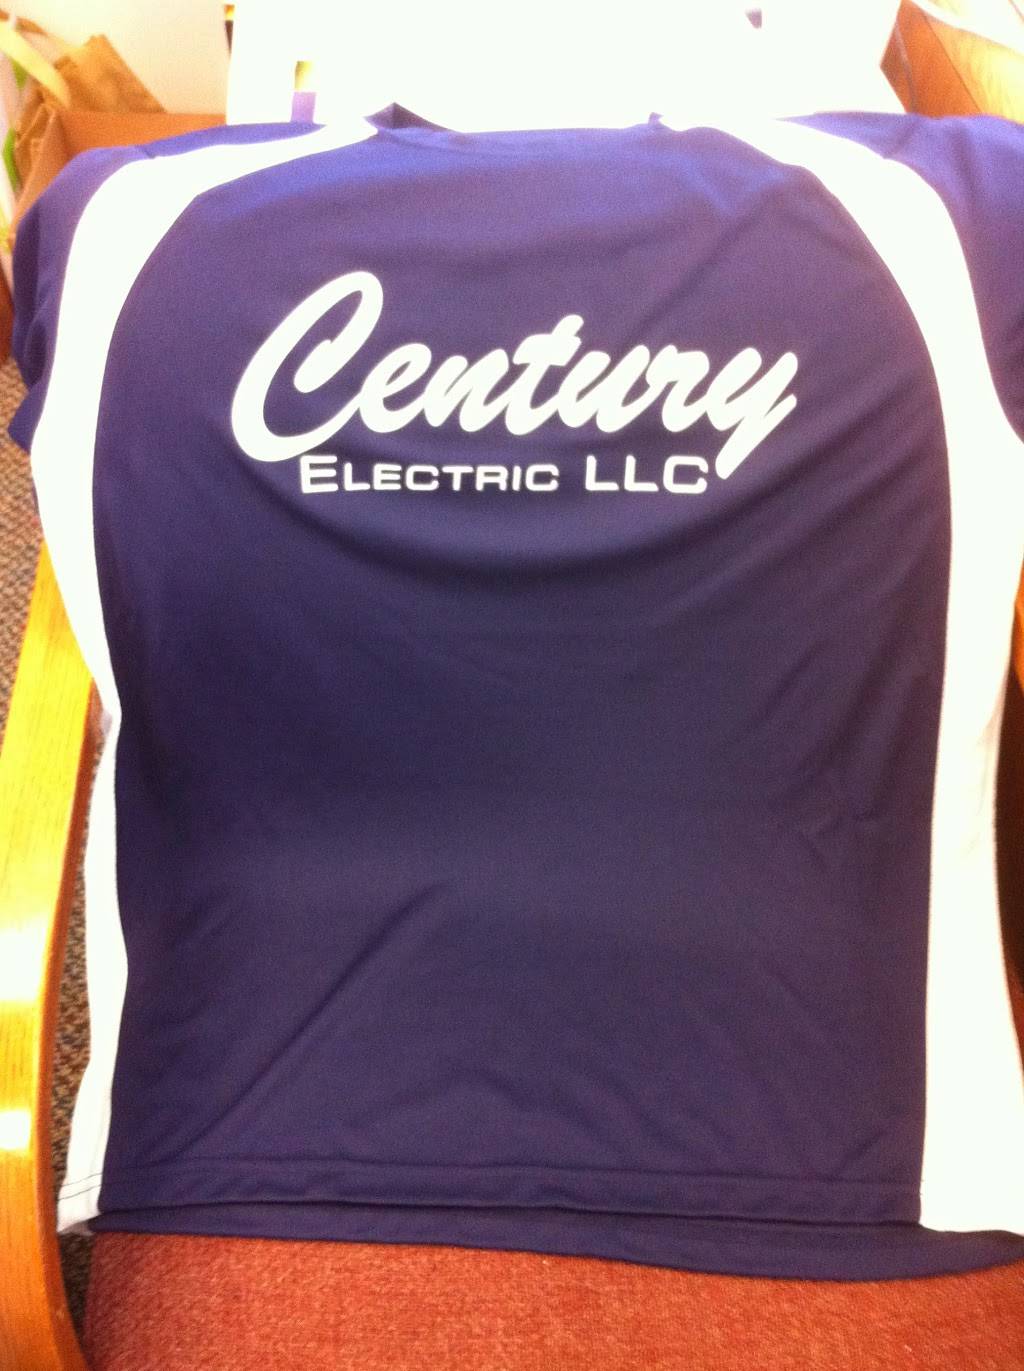 Century Electric Llc | 6960 S Canby St, Portland, OR 97223 | Phone: (503) 241-8020